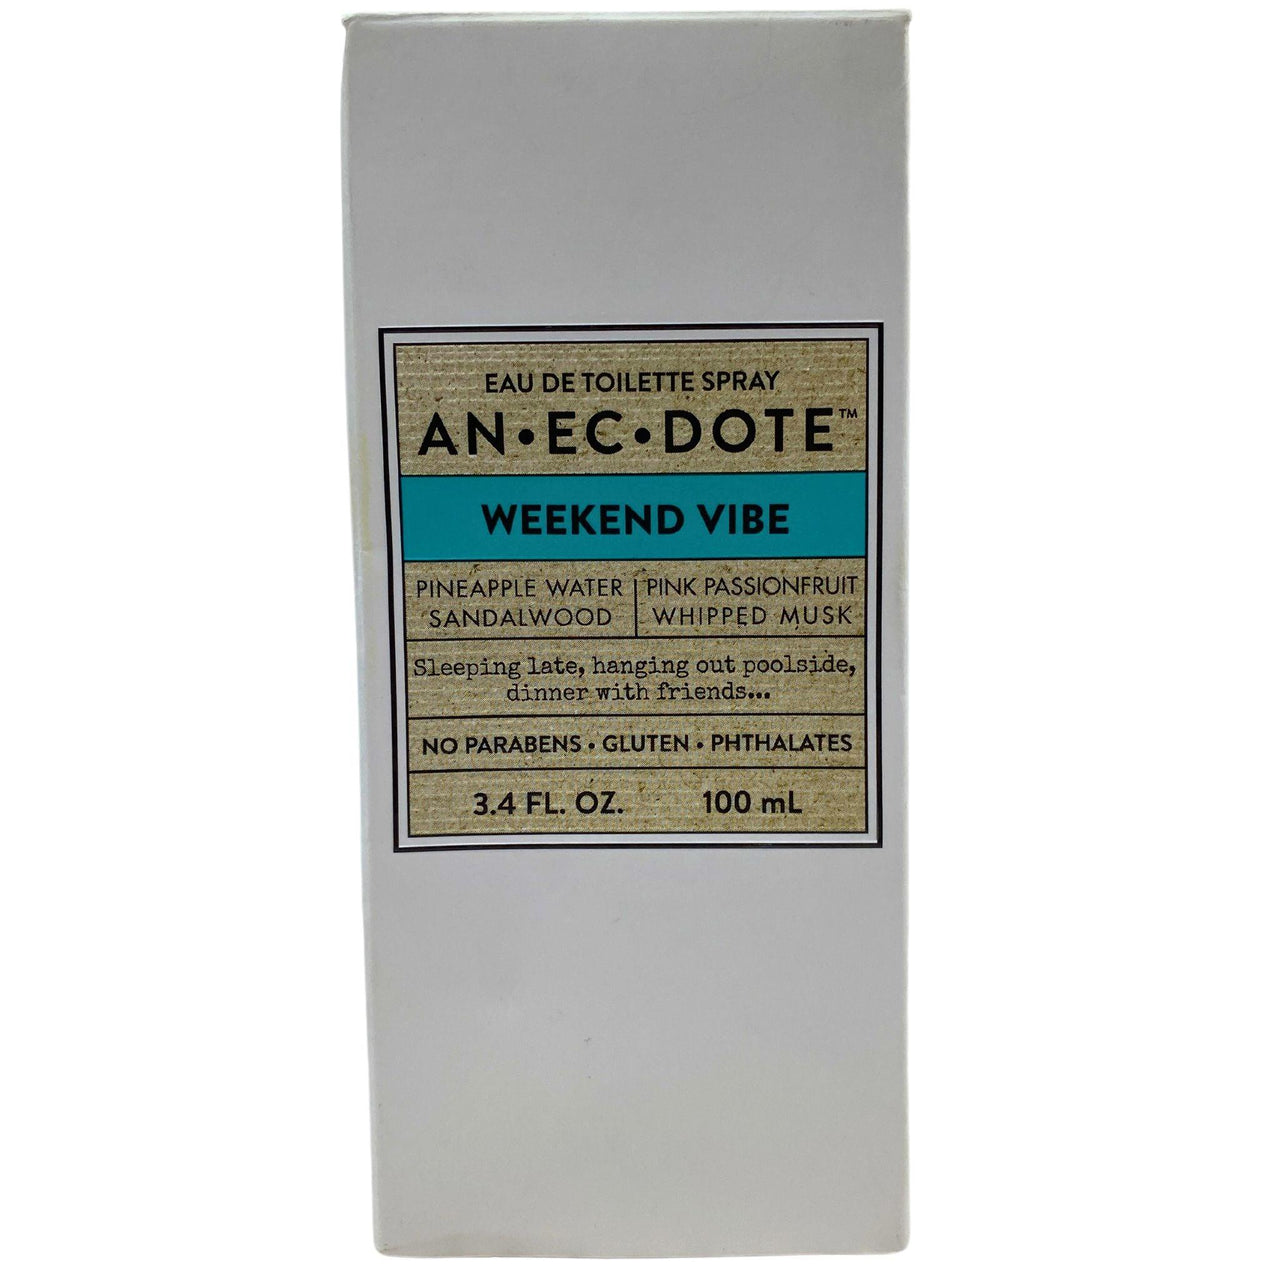 Anecdote Weekend Vibe Pineapple Water Sandalwood|Pink Passionfruit Whipped Musk 3.4OZ (50 Pcs Lot) - Discount Wholesalers Inc